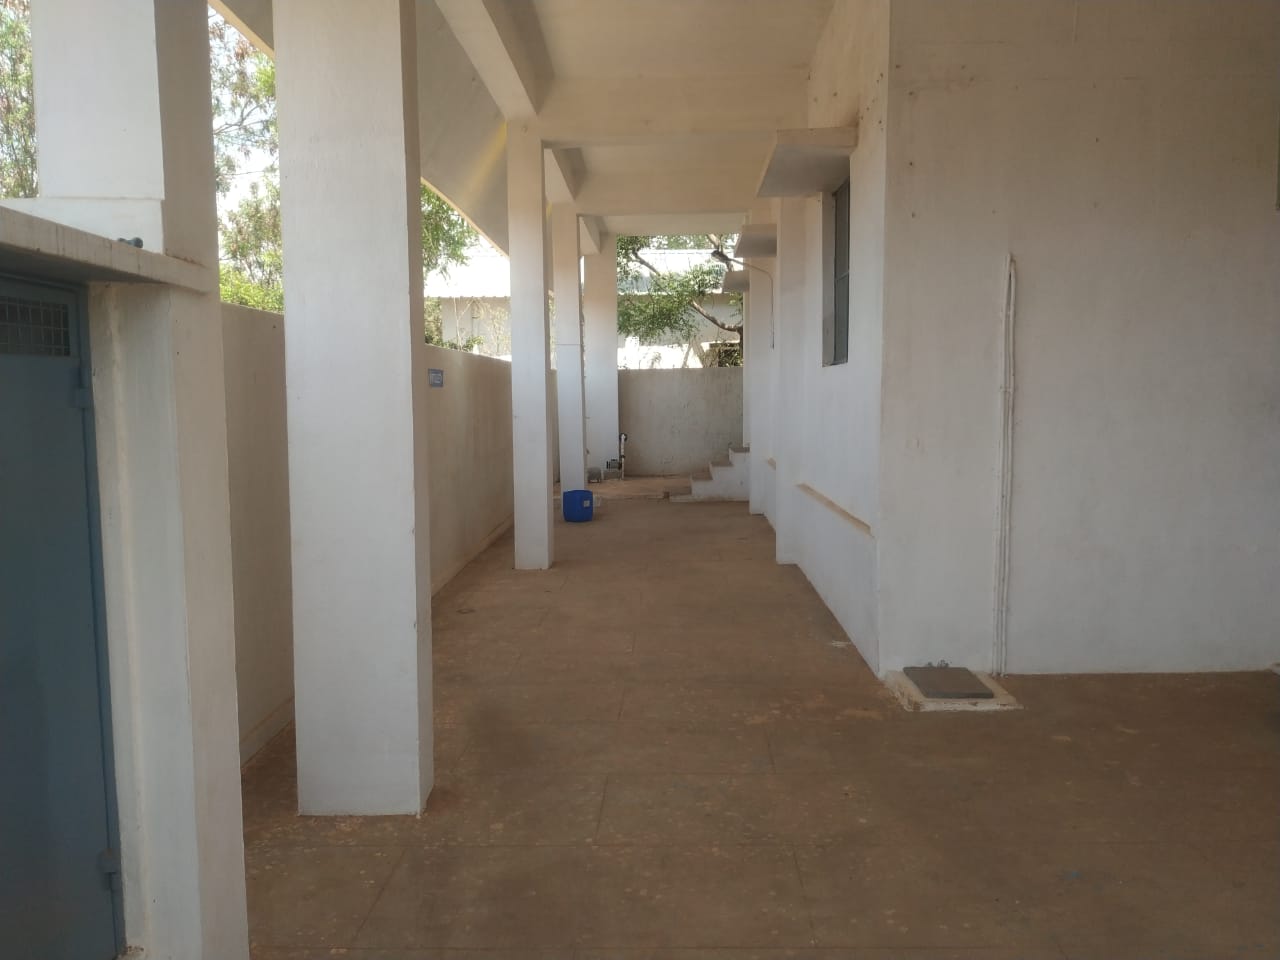 1200 sqft Commercial Warehouses/Godowns for Rent Only in Nadupalayam Pirivu